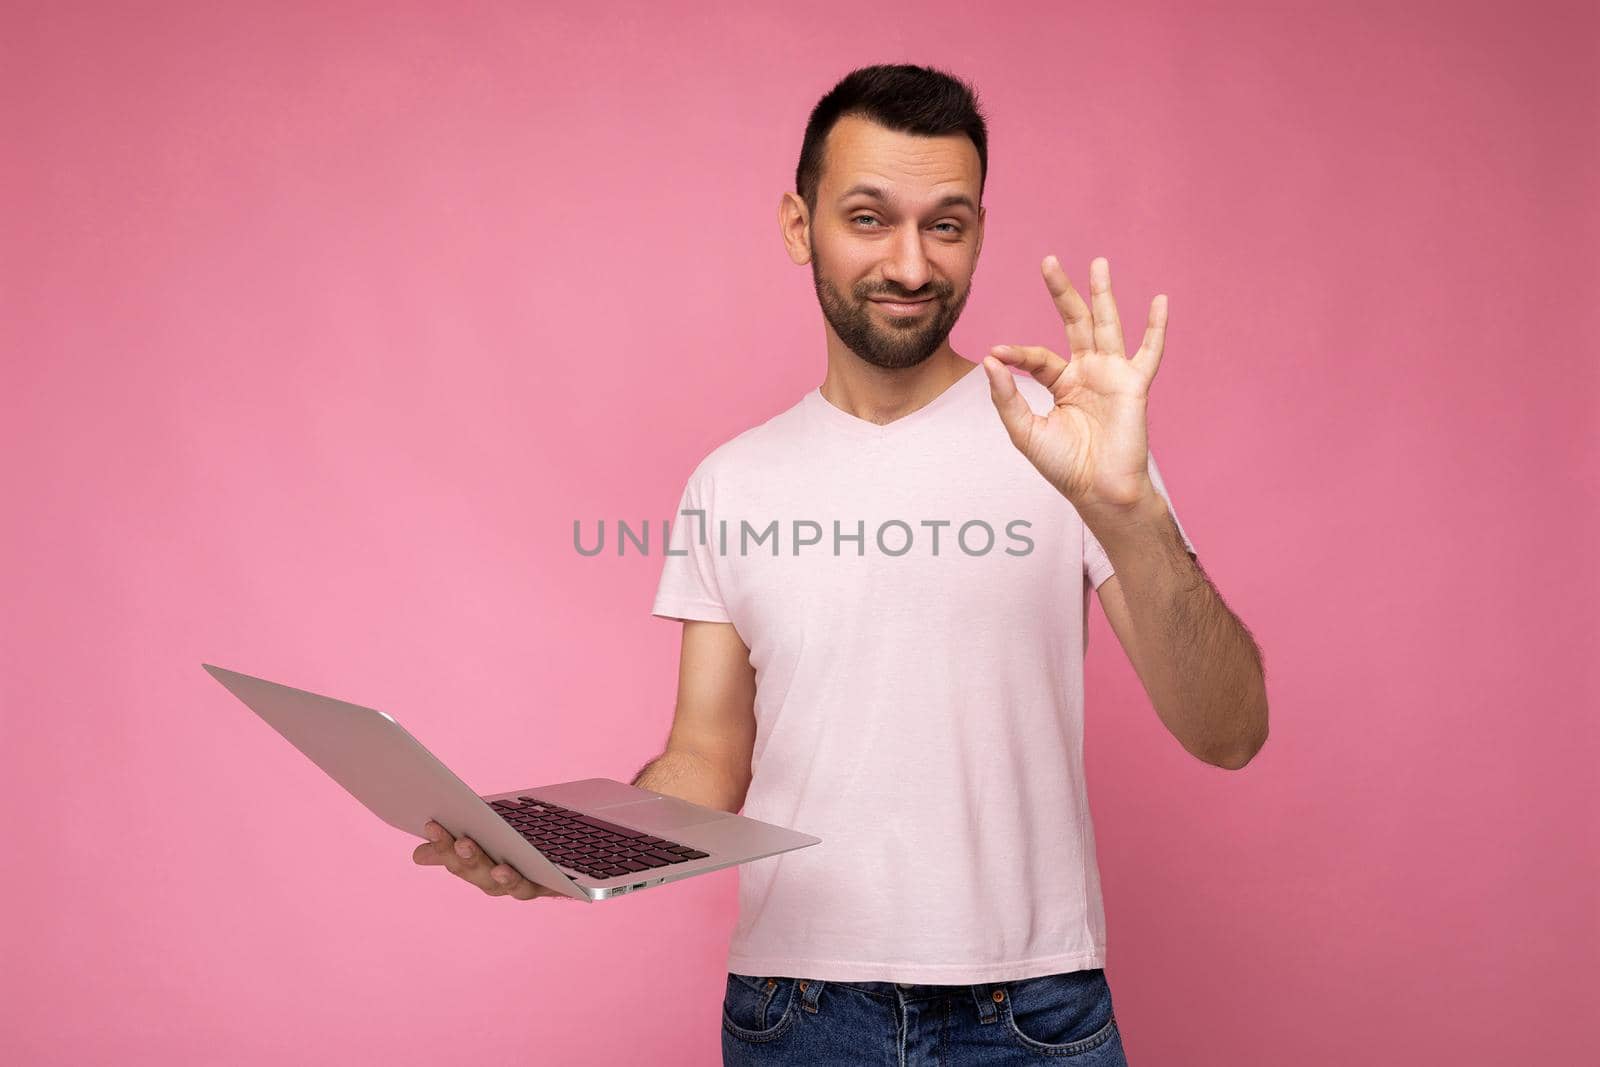 Handsome funny brunet man holding laptop computer and showing gesture okay looking at camera in t-shirt on isolated pink background.